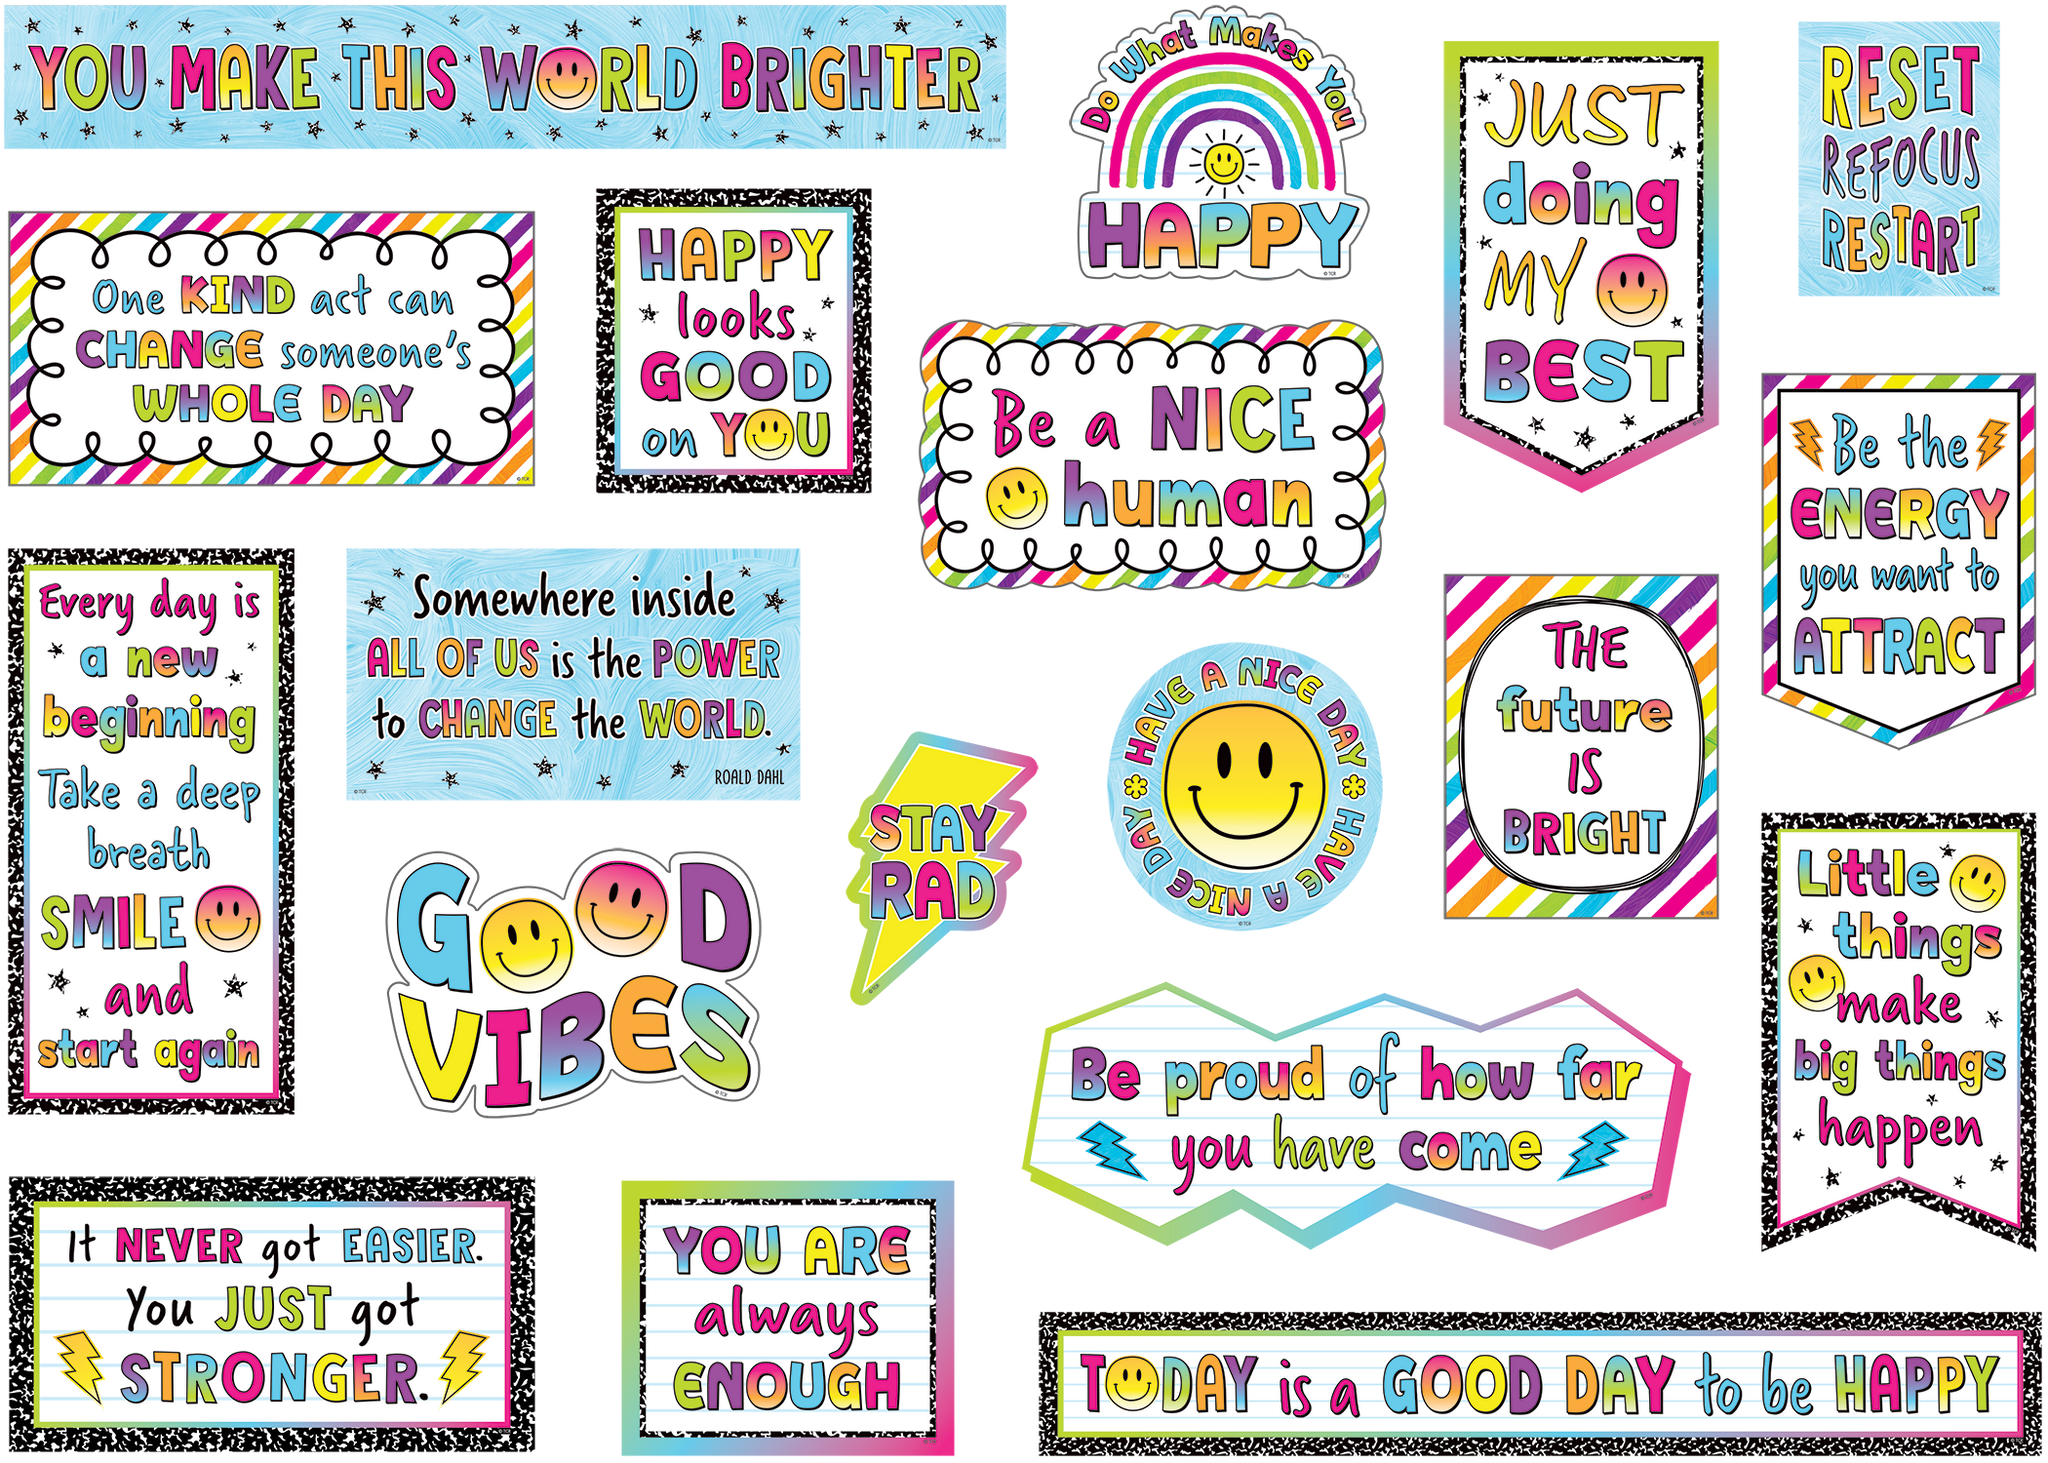 Features: 19 decorative signs with positive messages and a Bulletin Board Guide with suggestions and activities